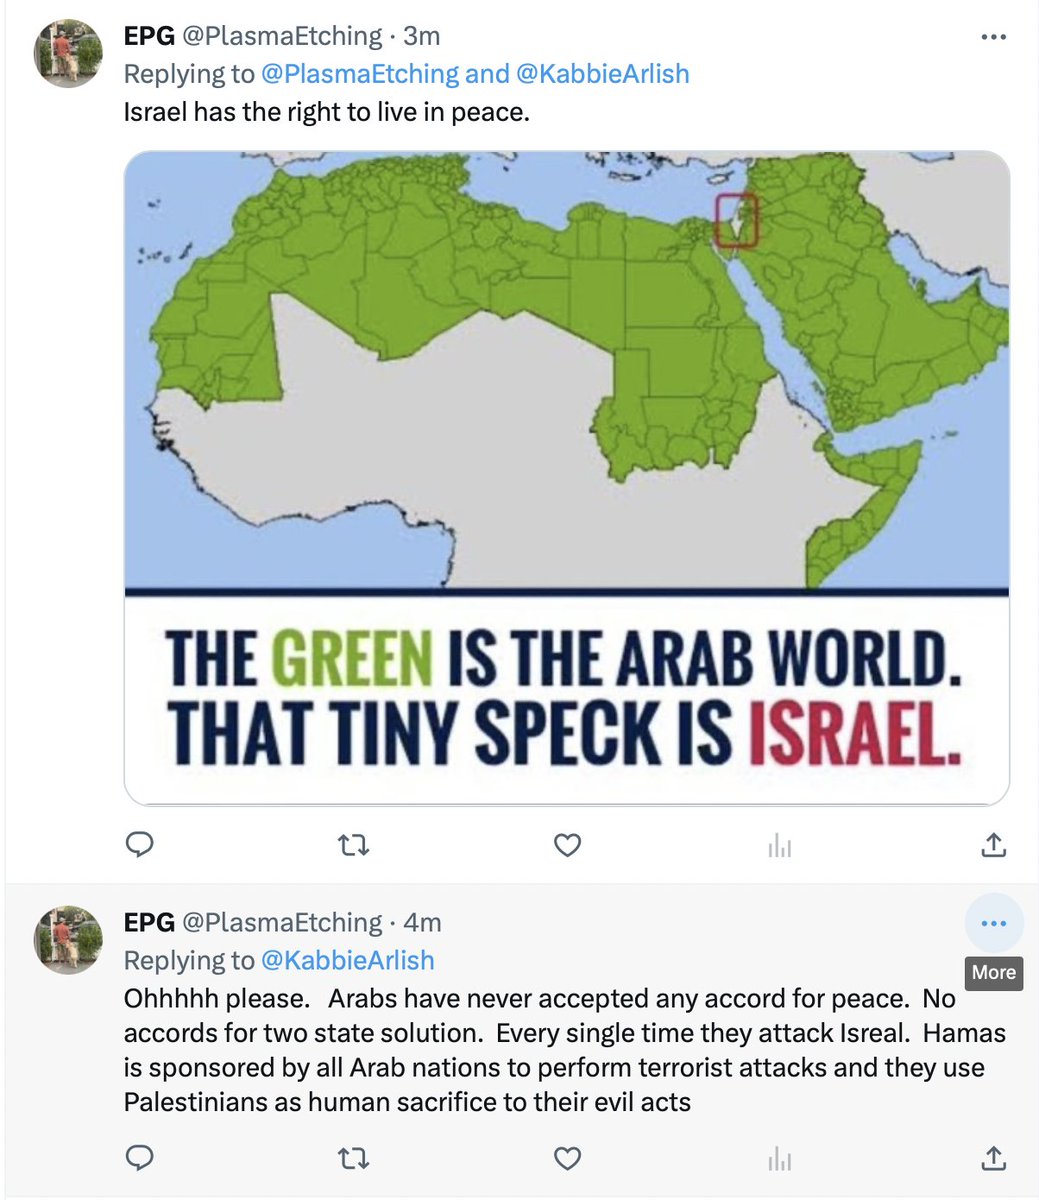 @PlasmaEtching Blocked but can see the replies they sent.

Palestine has a right to live in peace too. That right has been denied for 75 yrs. If you condemn Hamas but not Israeli violence, you believe Palestinian lives are less valuable than Israeli.

That's nothing more than bigotry and hate.